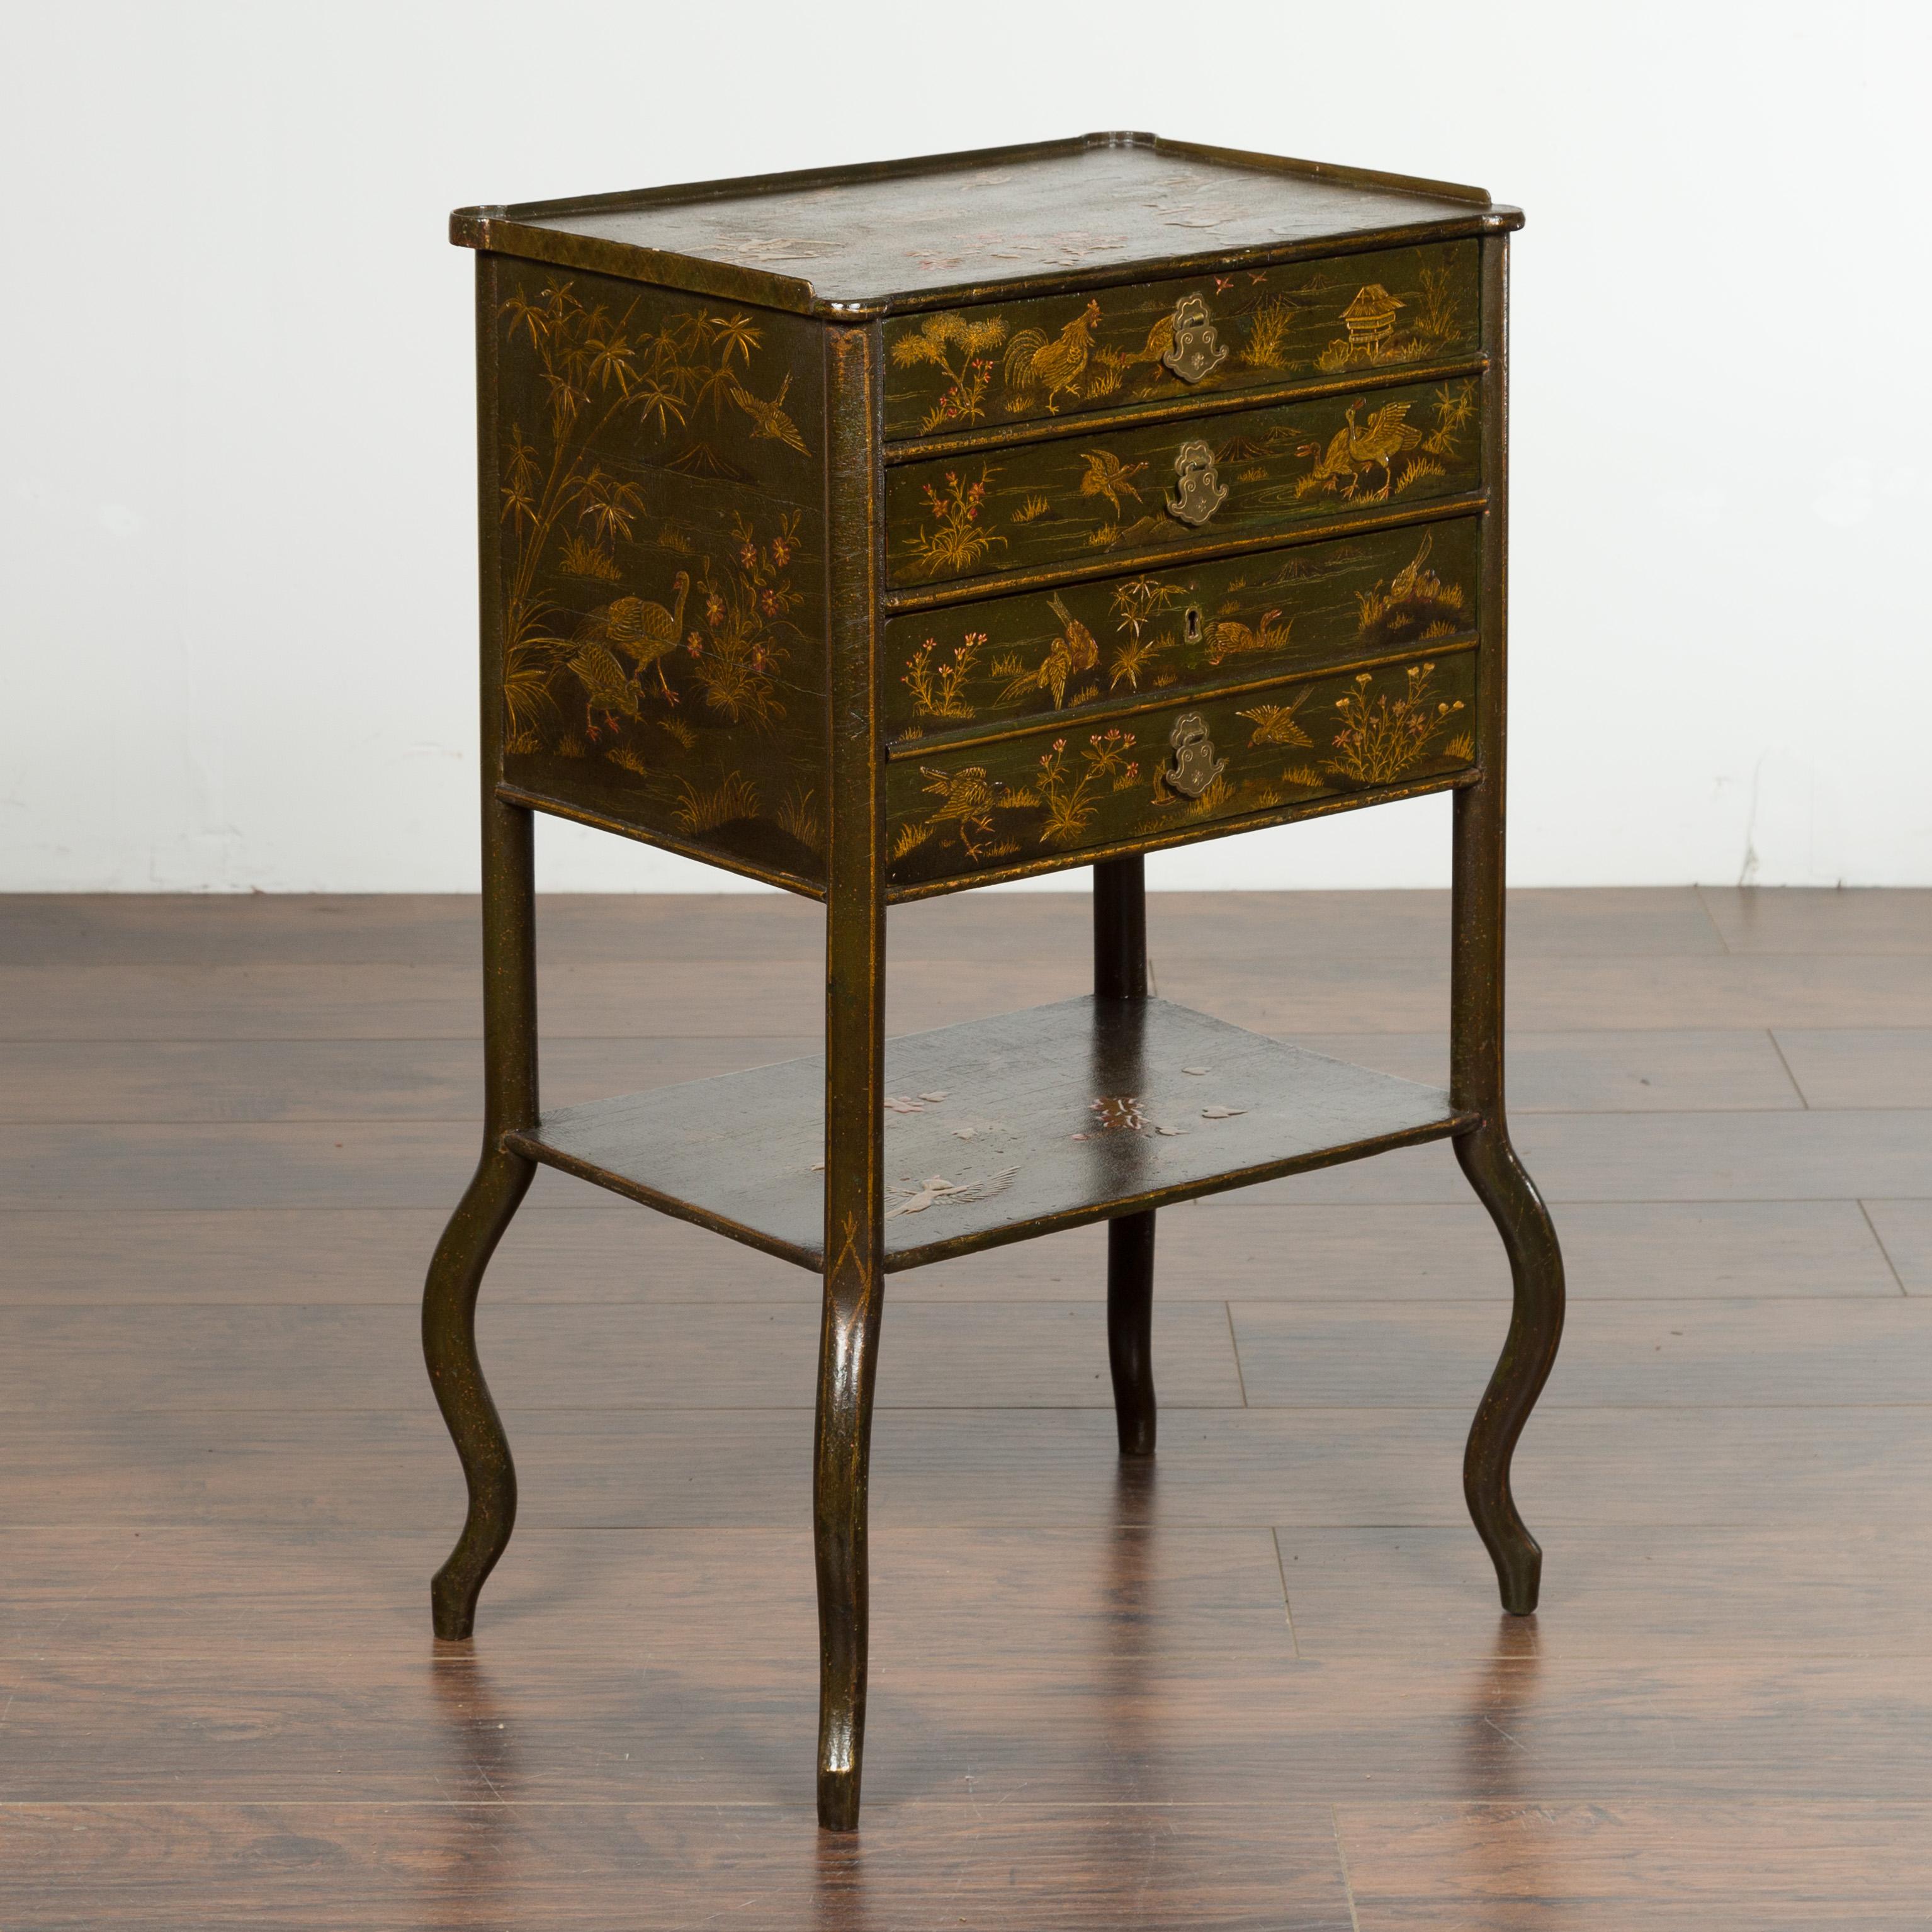 English 19th Century Chinoiserie Table with Four Drawers, Shelf and Curving Legs 9